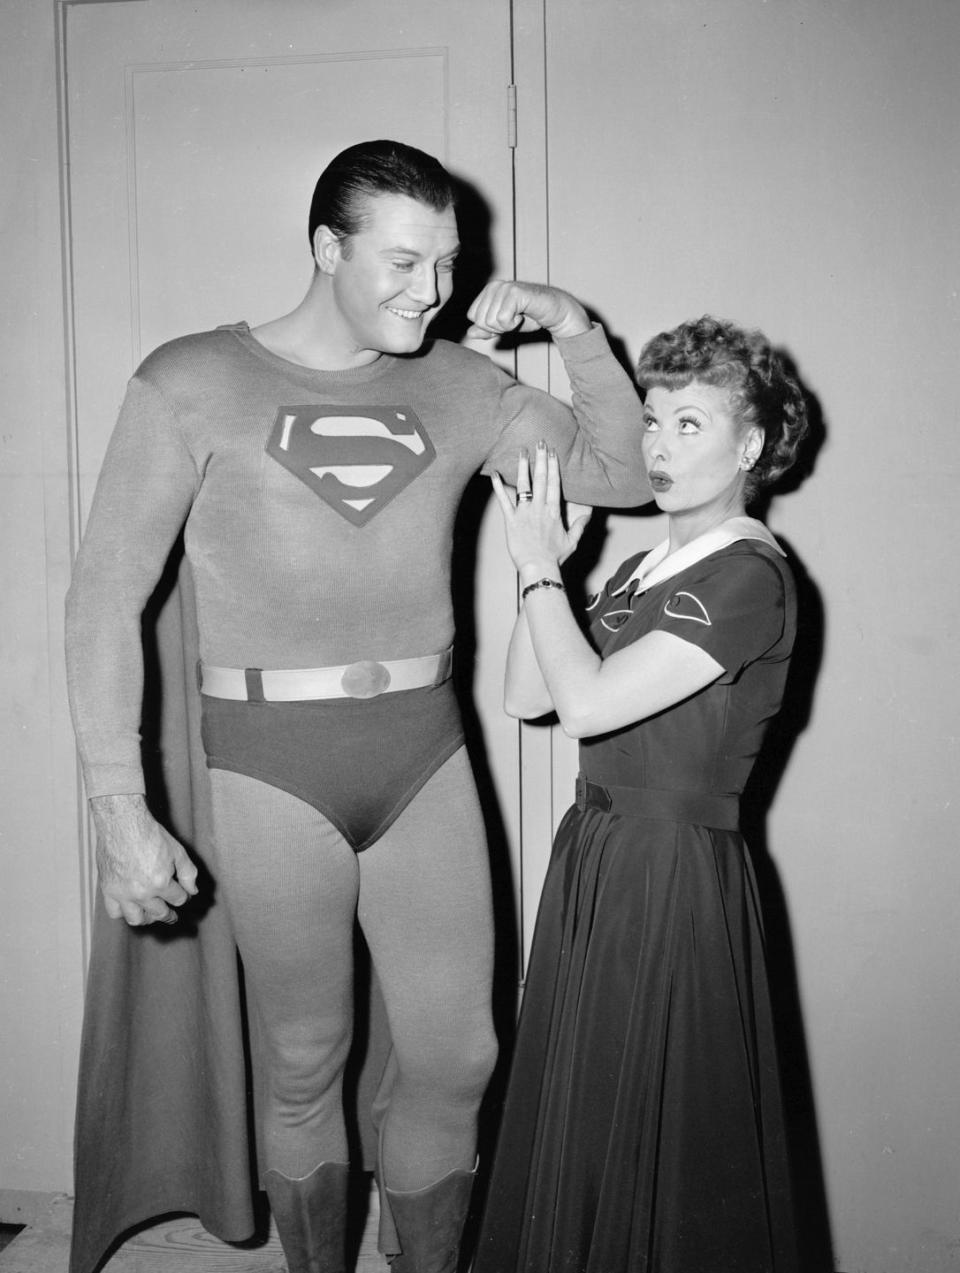 1956: Posing with George Reeves dressed as Superman behind the scenes for an episode of 'I Love Lucy'